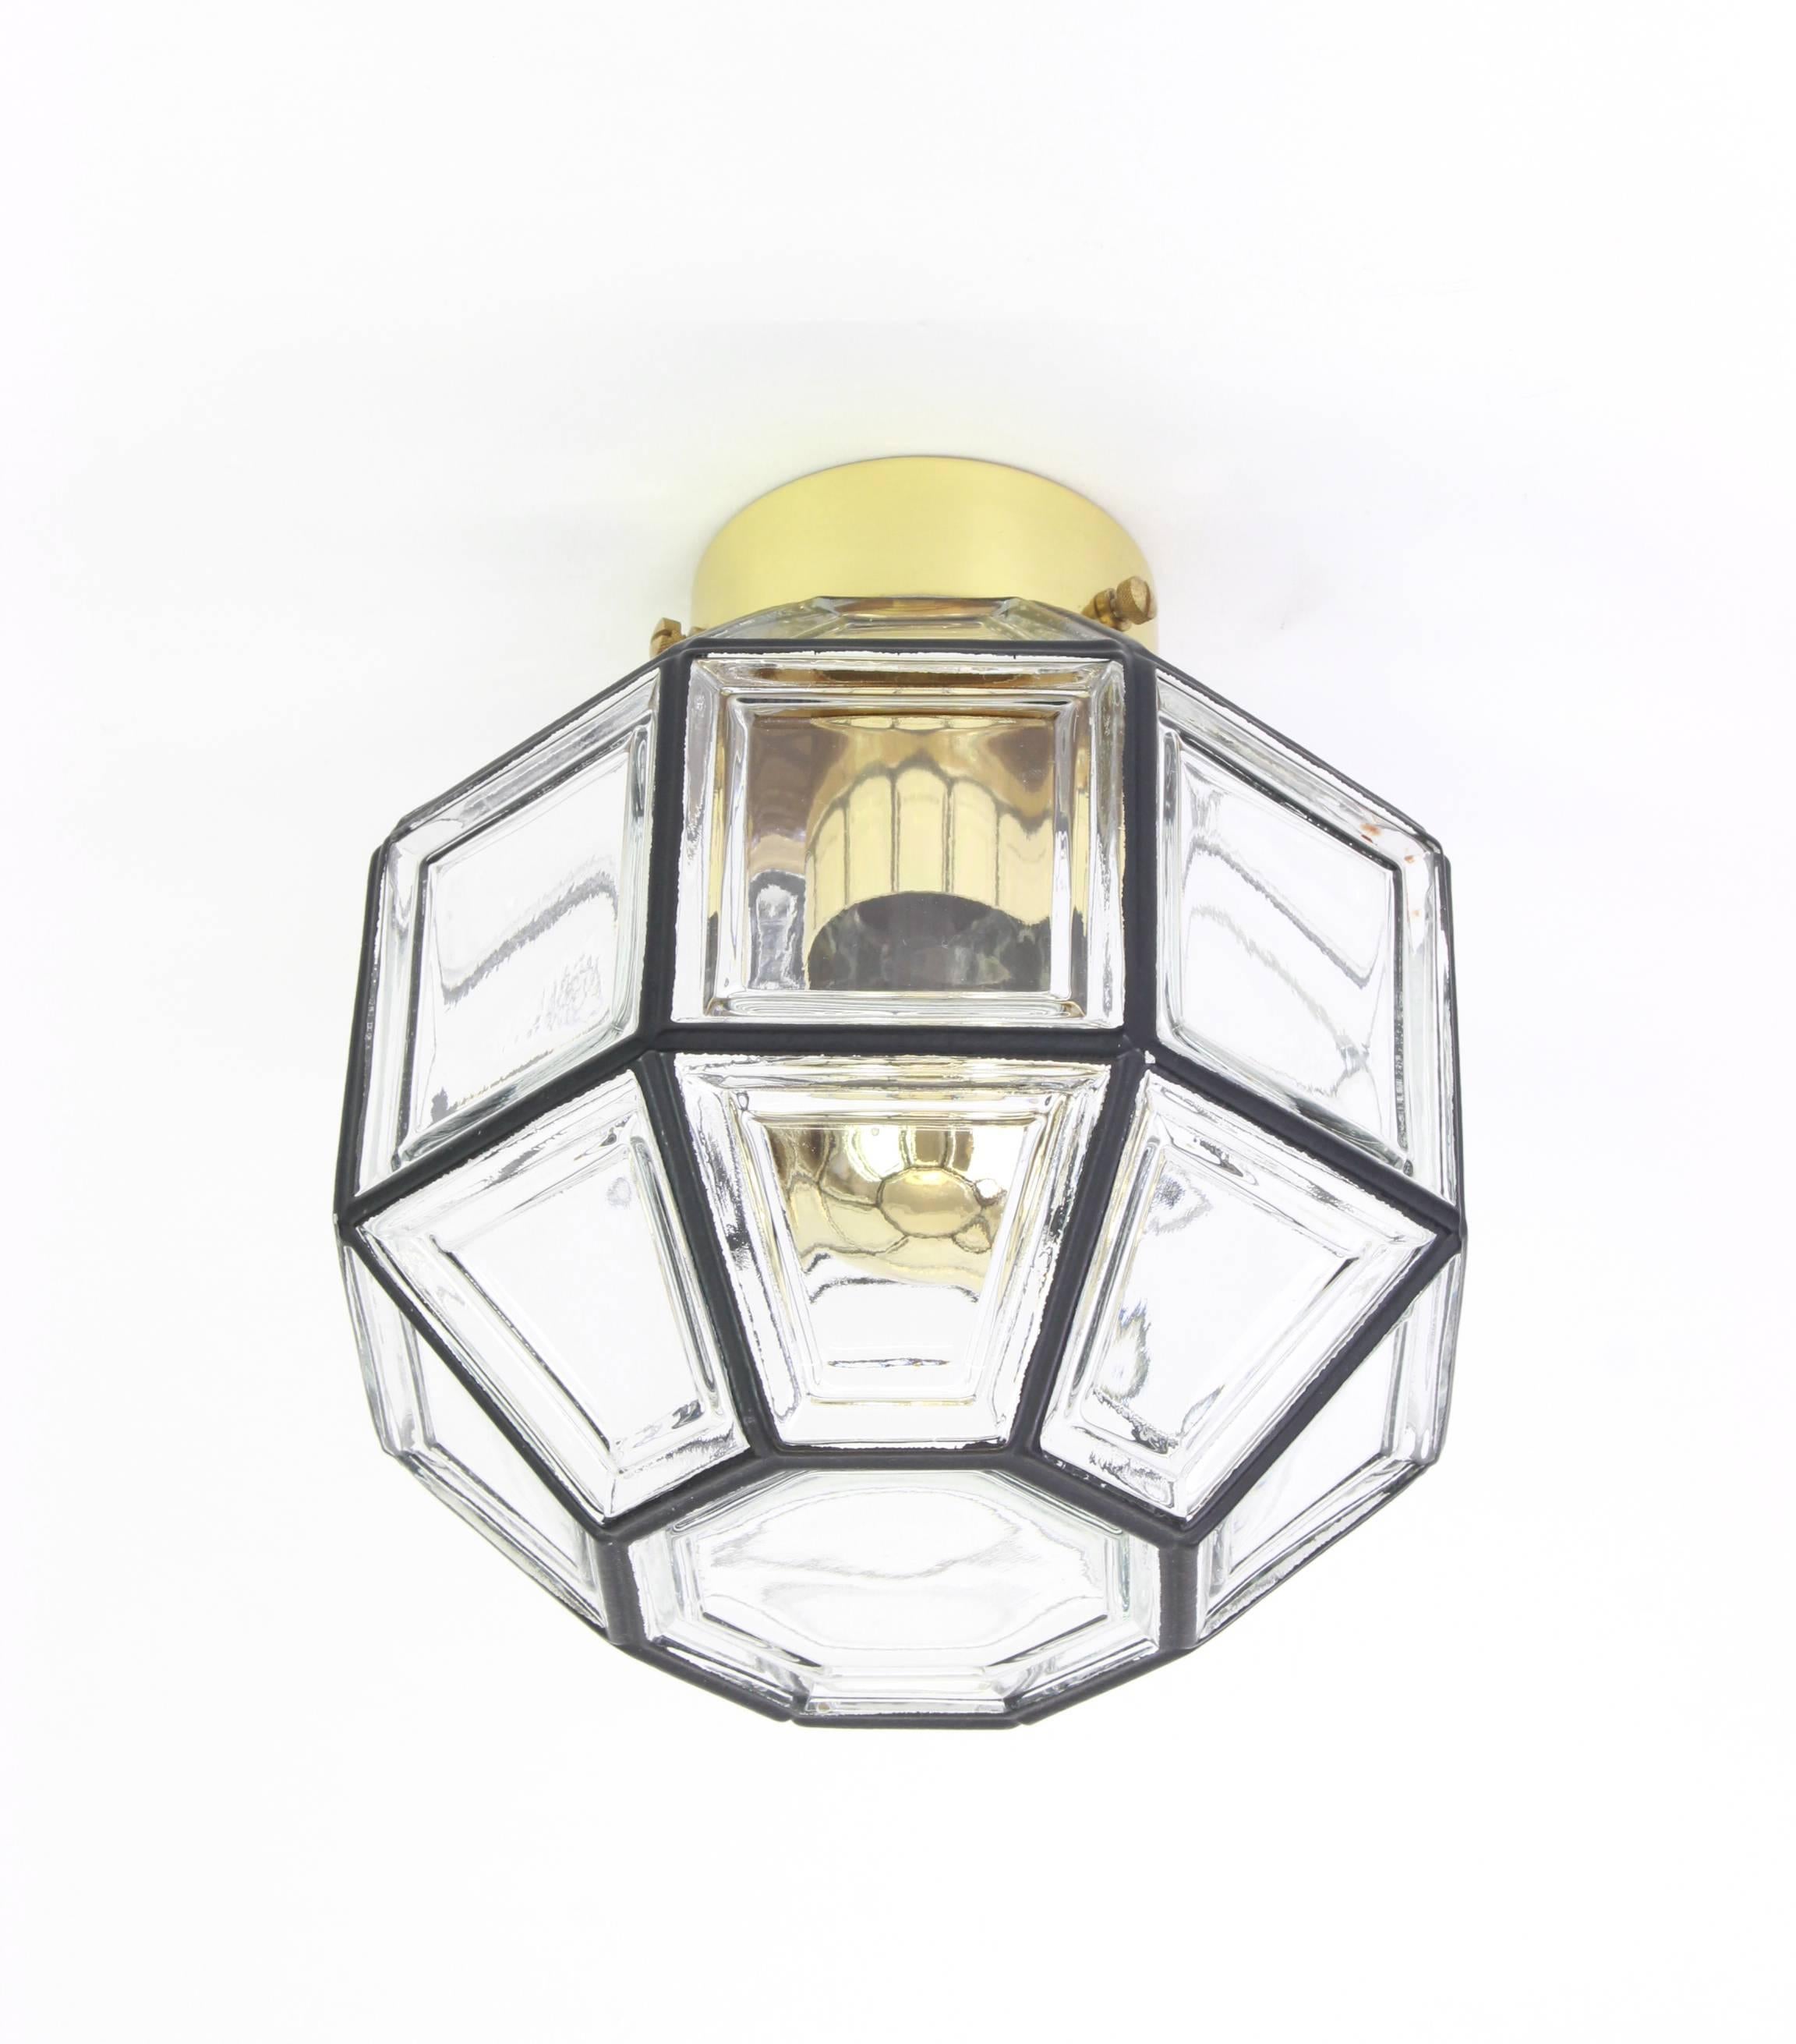 Minimalist iron and clear glass flush mount manufactured by Limburg Glashutte Germany, circa 1960-1969. Octagonal shaped lantern and multifaceted clear glass.

High quality and in very good condition. Cleaned, well-wired and ready to use. 

The